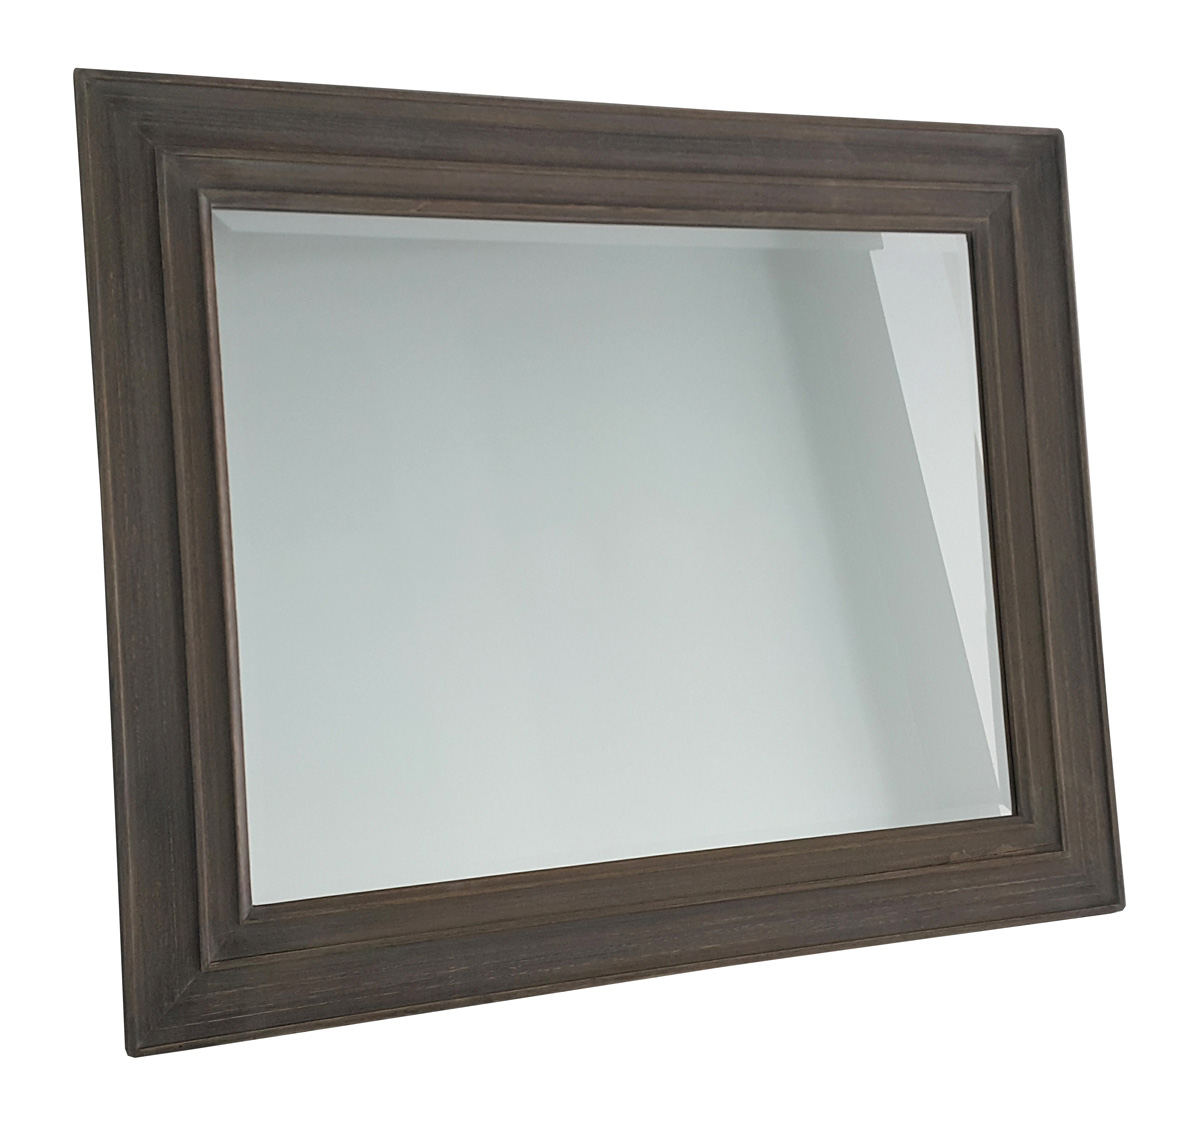 Country Oak Design Frame with Bevell Mirror  